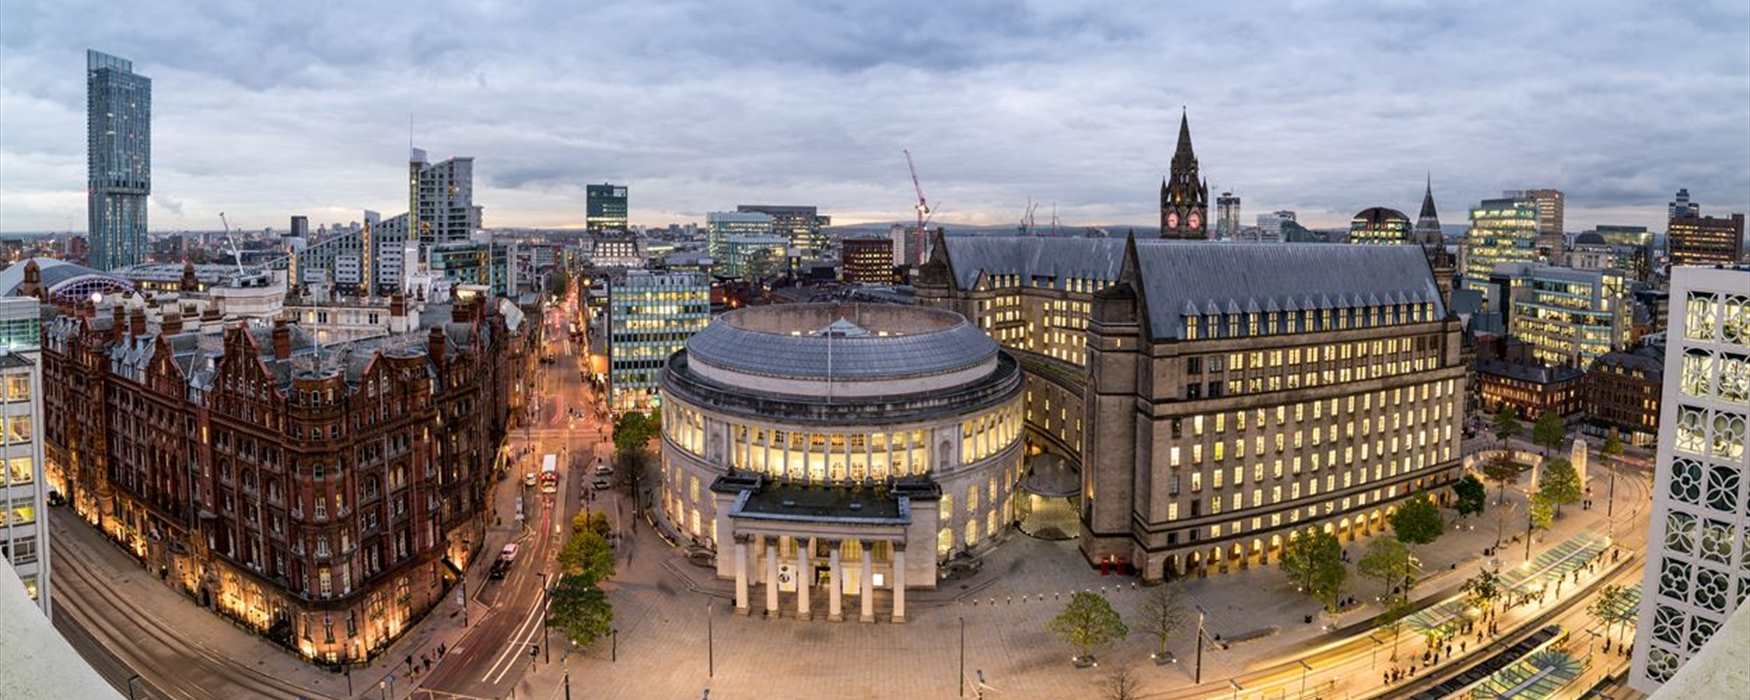 Study in Manchester - Study In Manchester